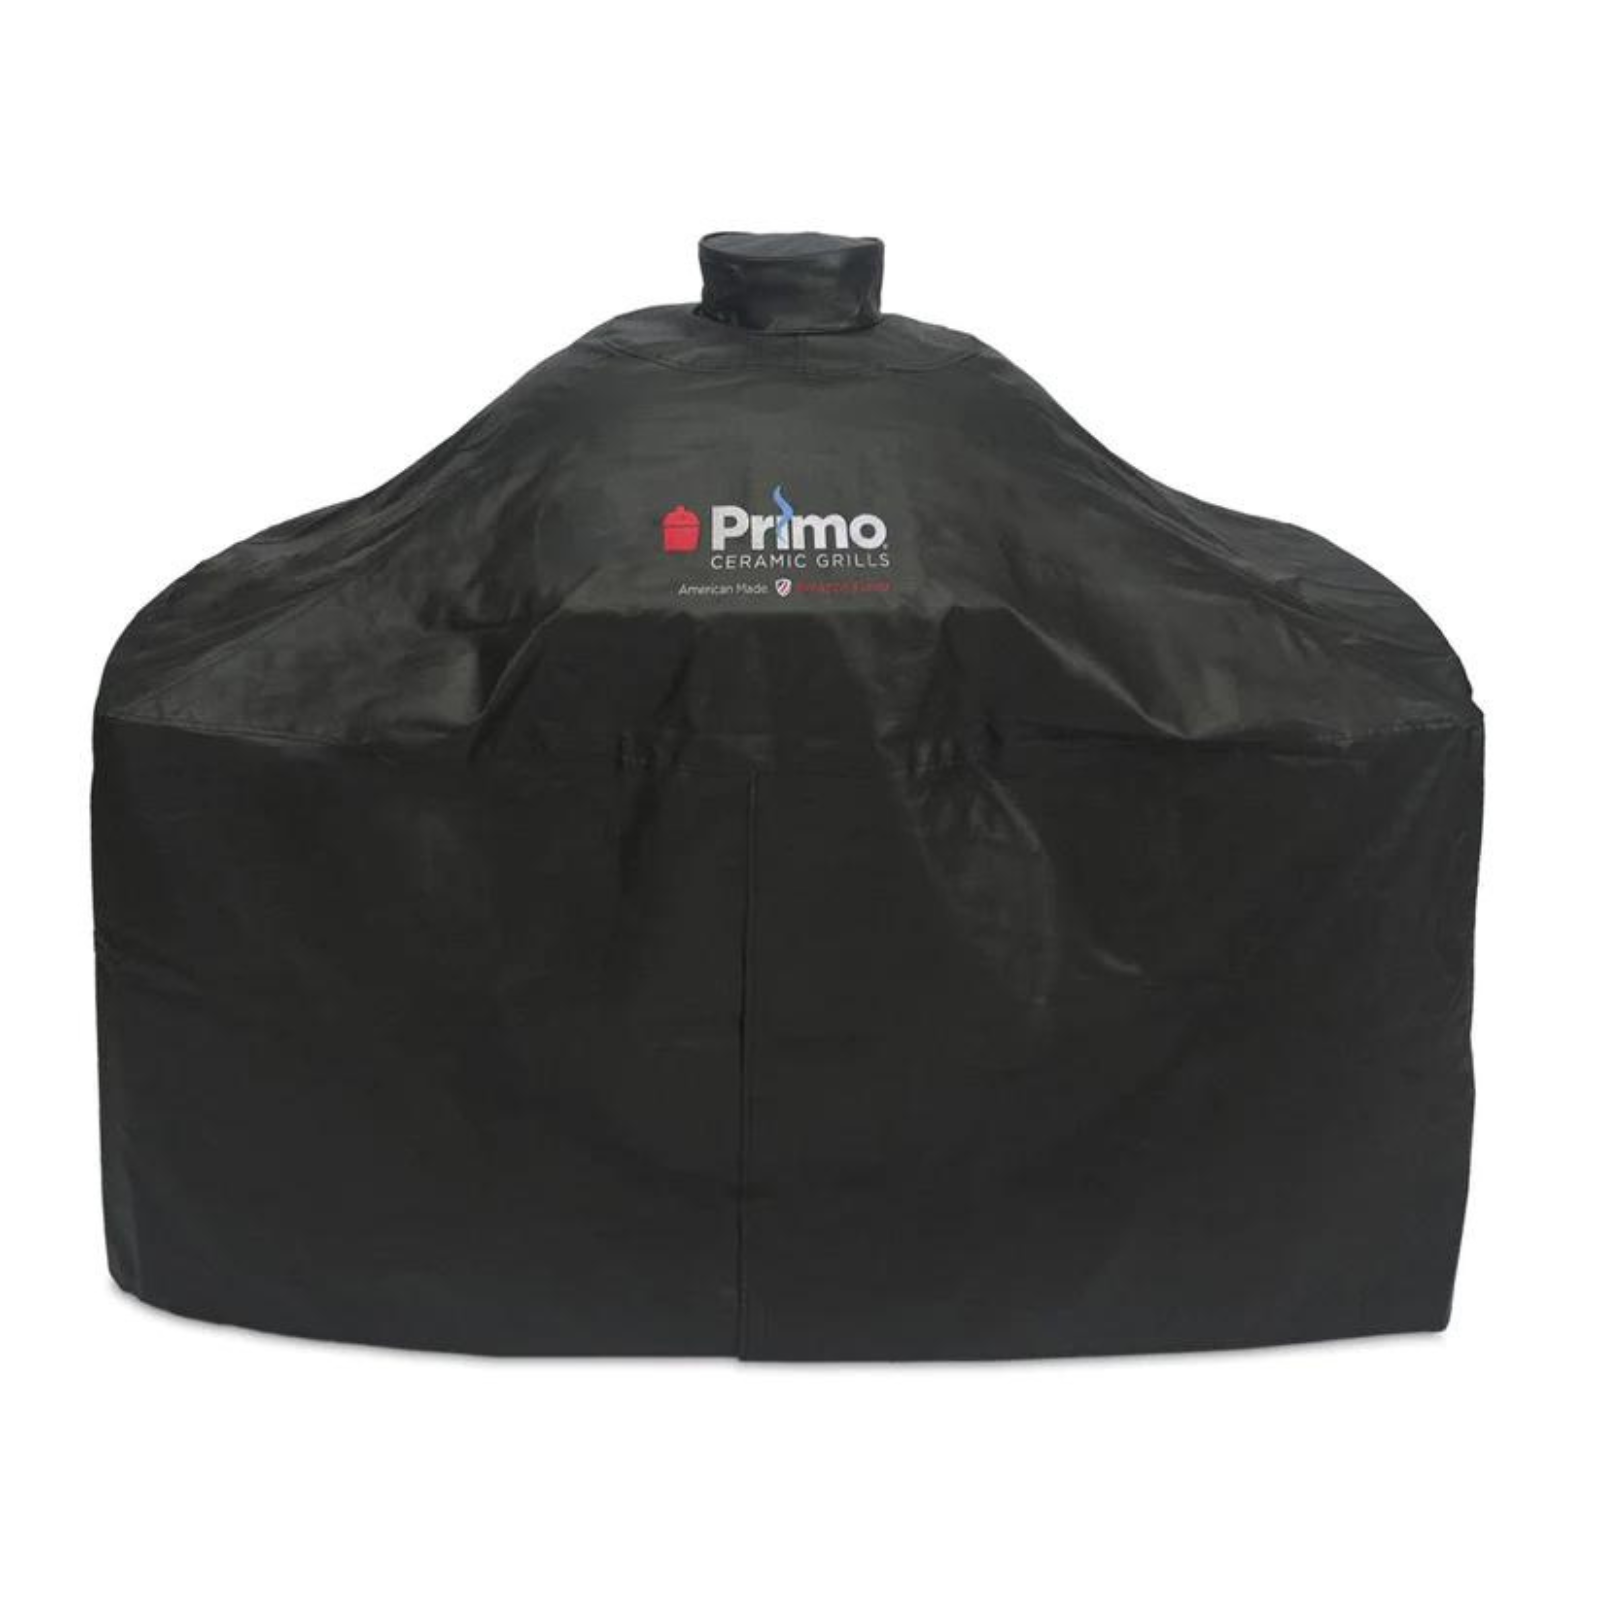 Primo Grill Cover for LG 300 or JR 200 with Countertop Table